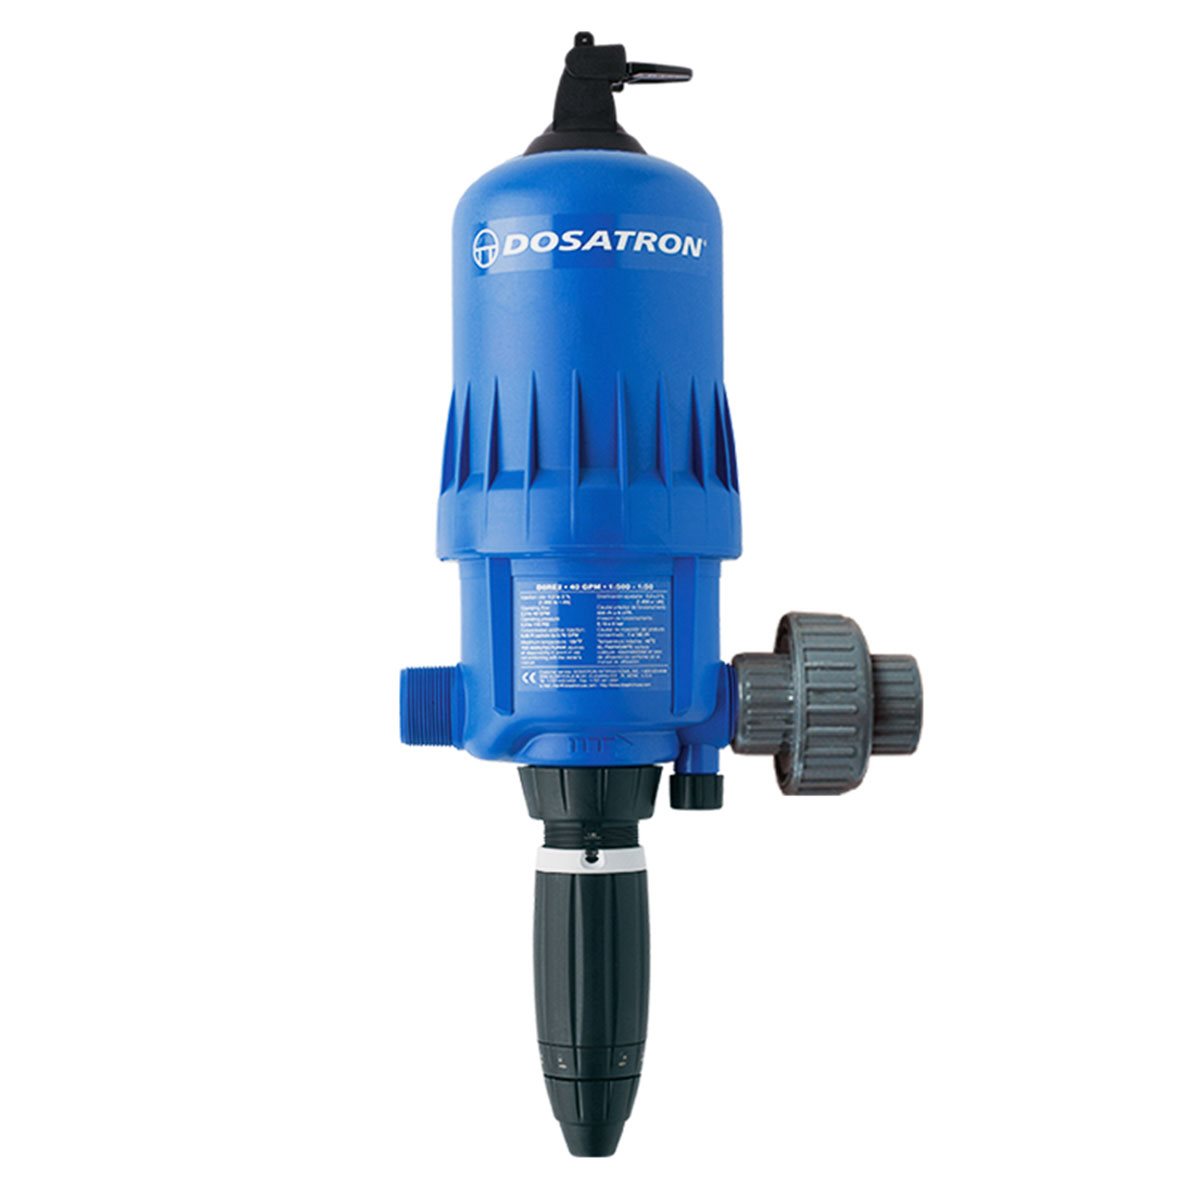 Product Image:Dosatron NDS 40GPM Unit 7.5-75mL (1.5-15 tsp) with Metal Piston